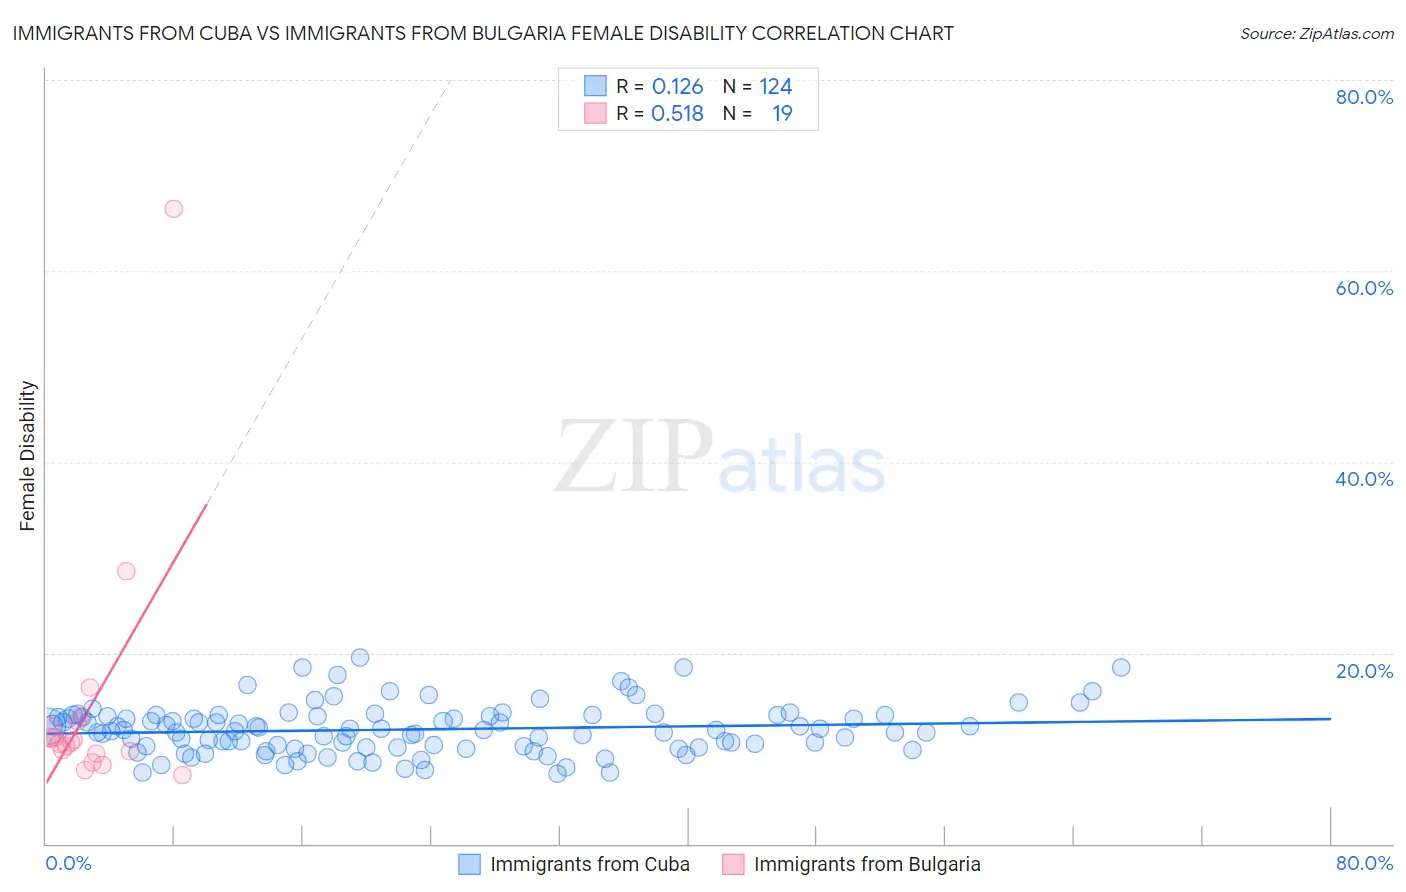 Immigrants from Cuba vs Immigrants from Bulgaria Female Disability